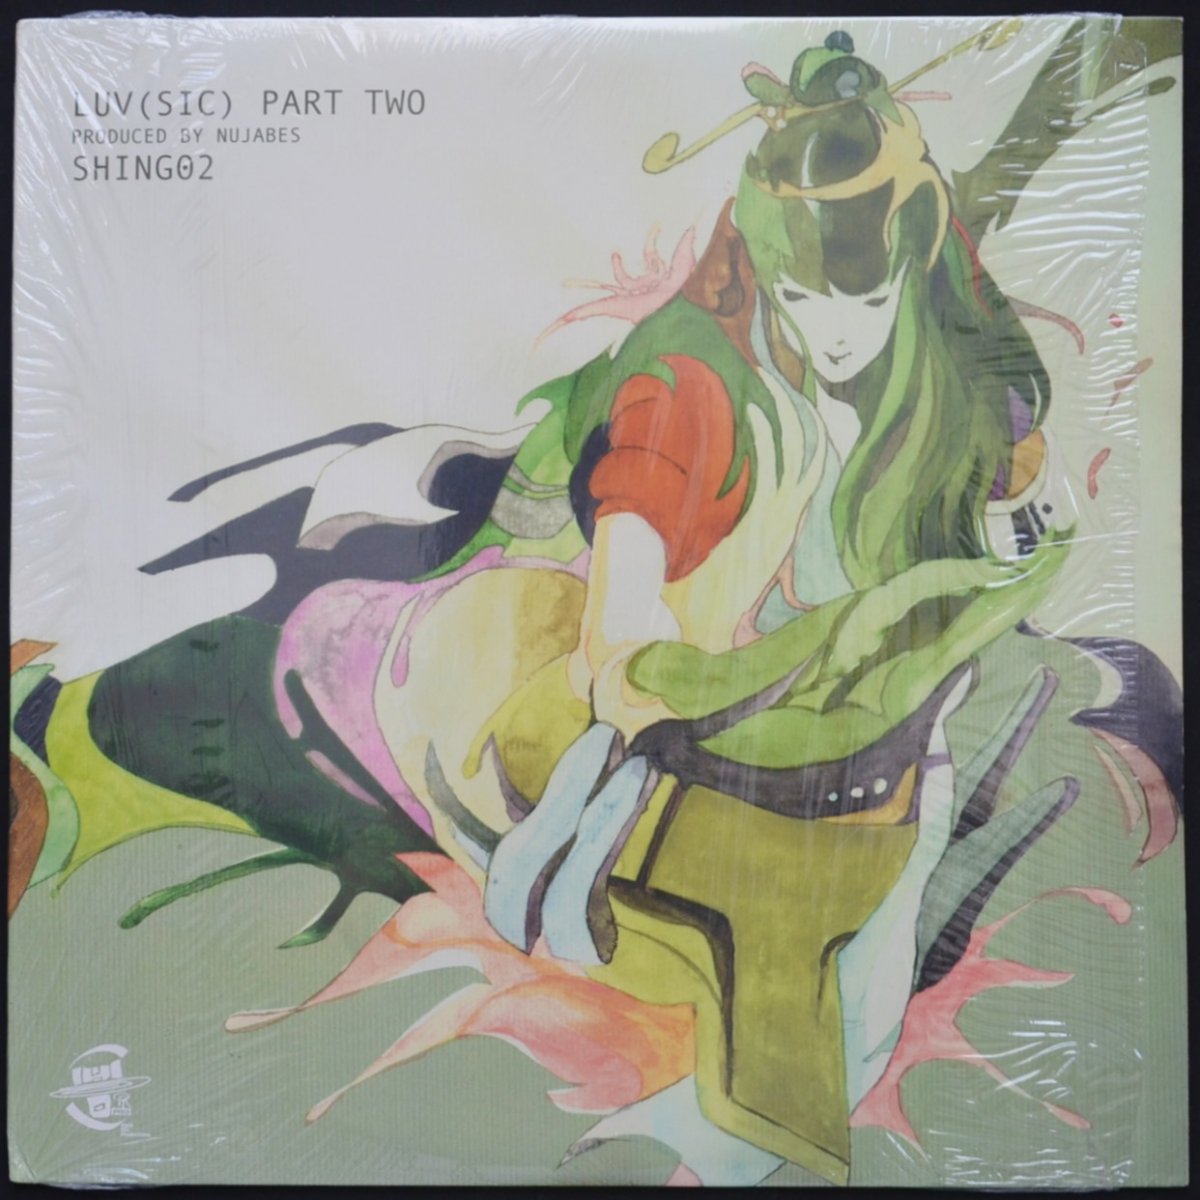 Shing02 Luv (sic) Part Two LP Nujabes-